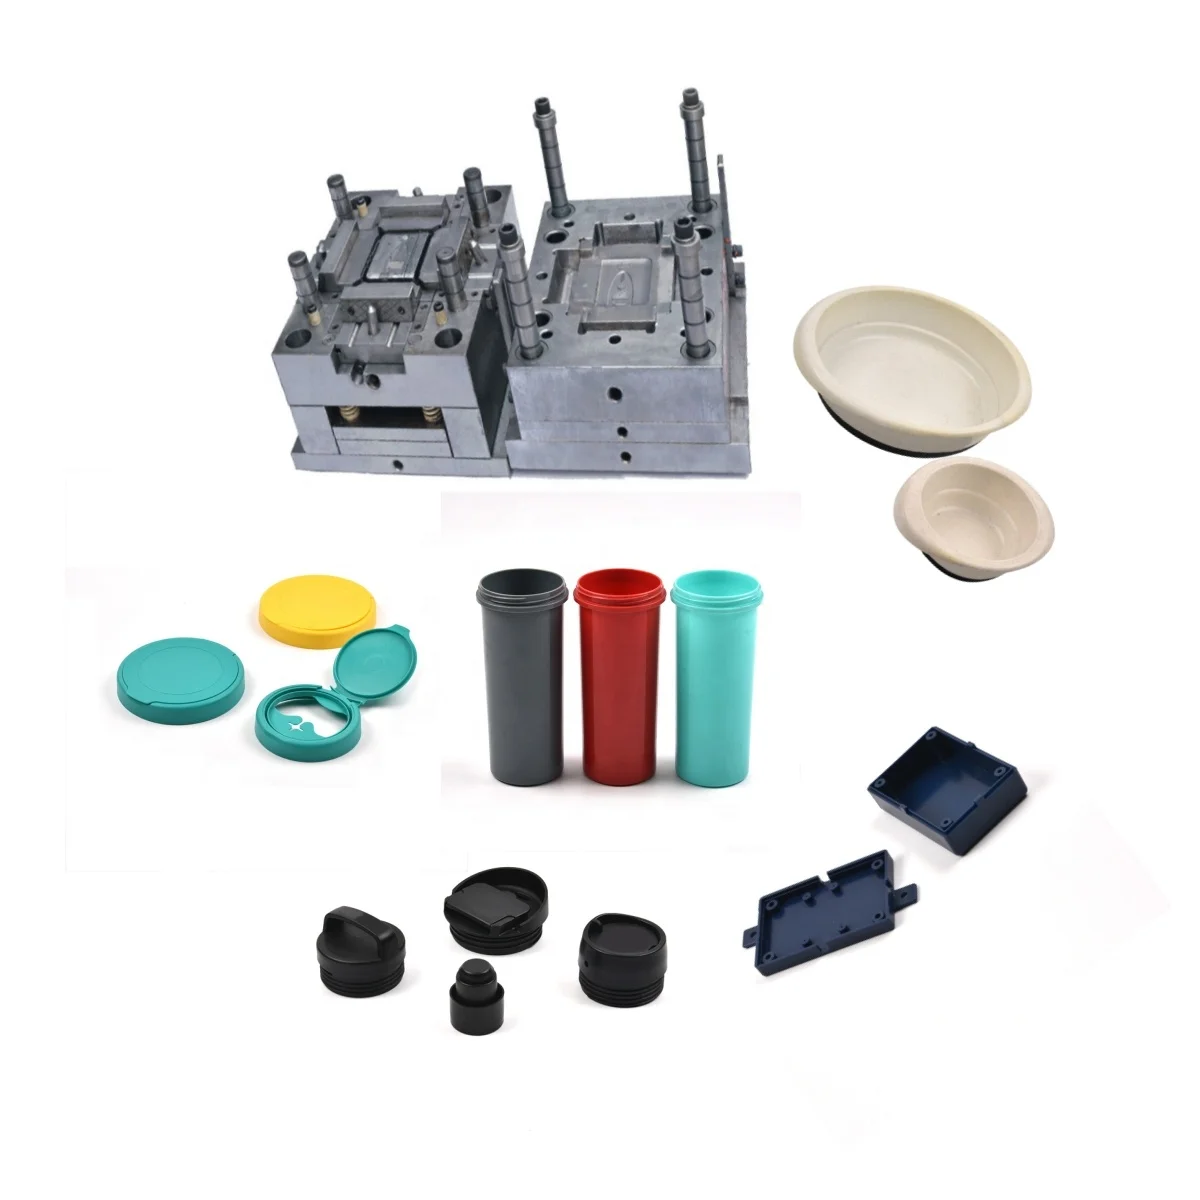 Custom Plastic Injection Molding Oem Manufacturer Plastic Products Abs Plastic Mold Service - Buy Plastic Mold,Plastic Injection Molding Service,Oem Injection Mold Plastic Injection Moulds Product on Alibaba.com